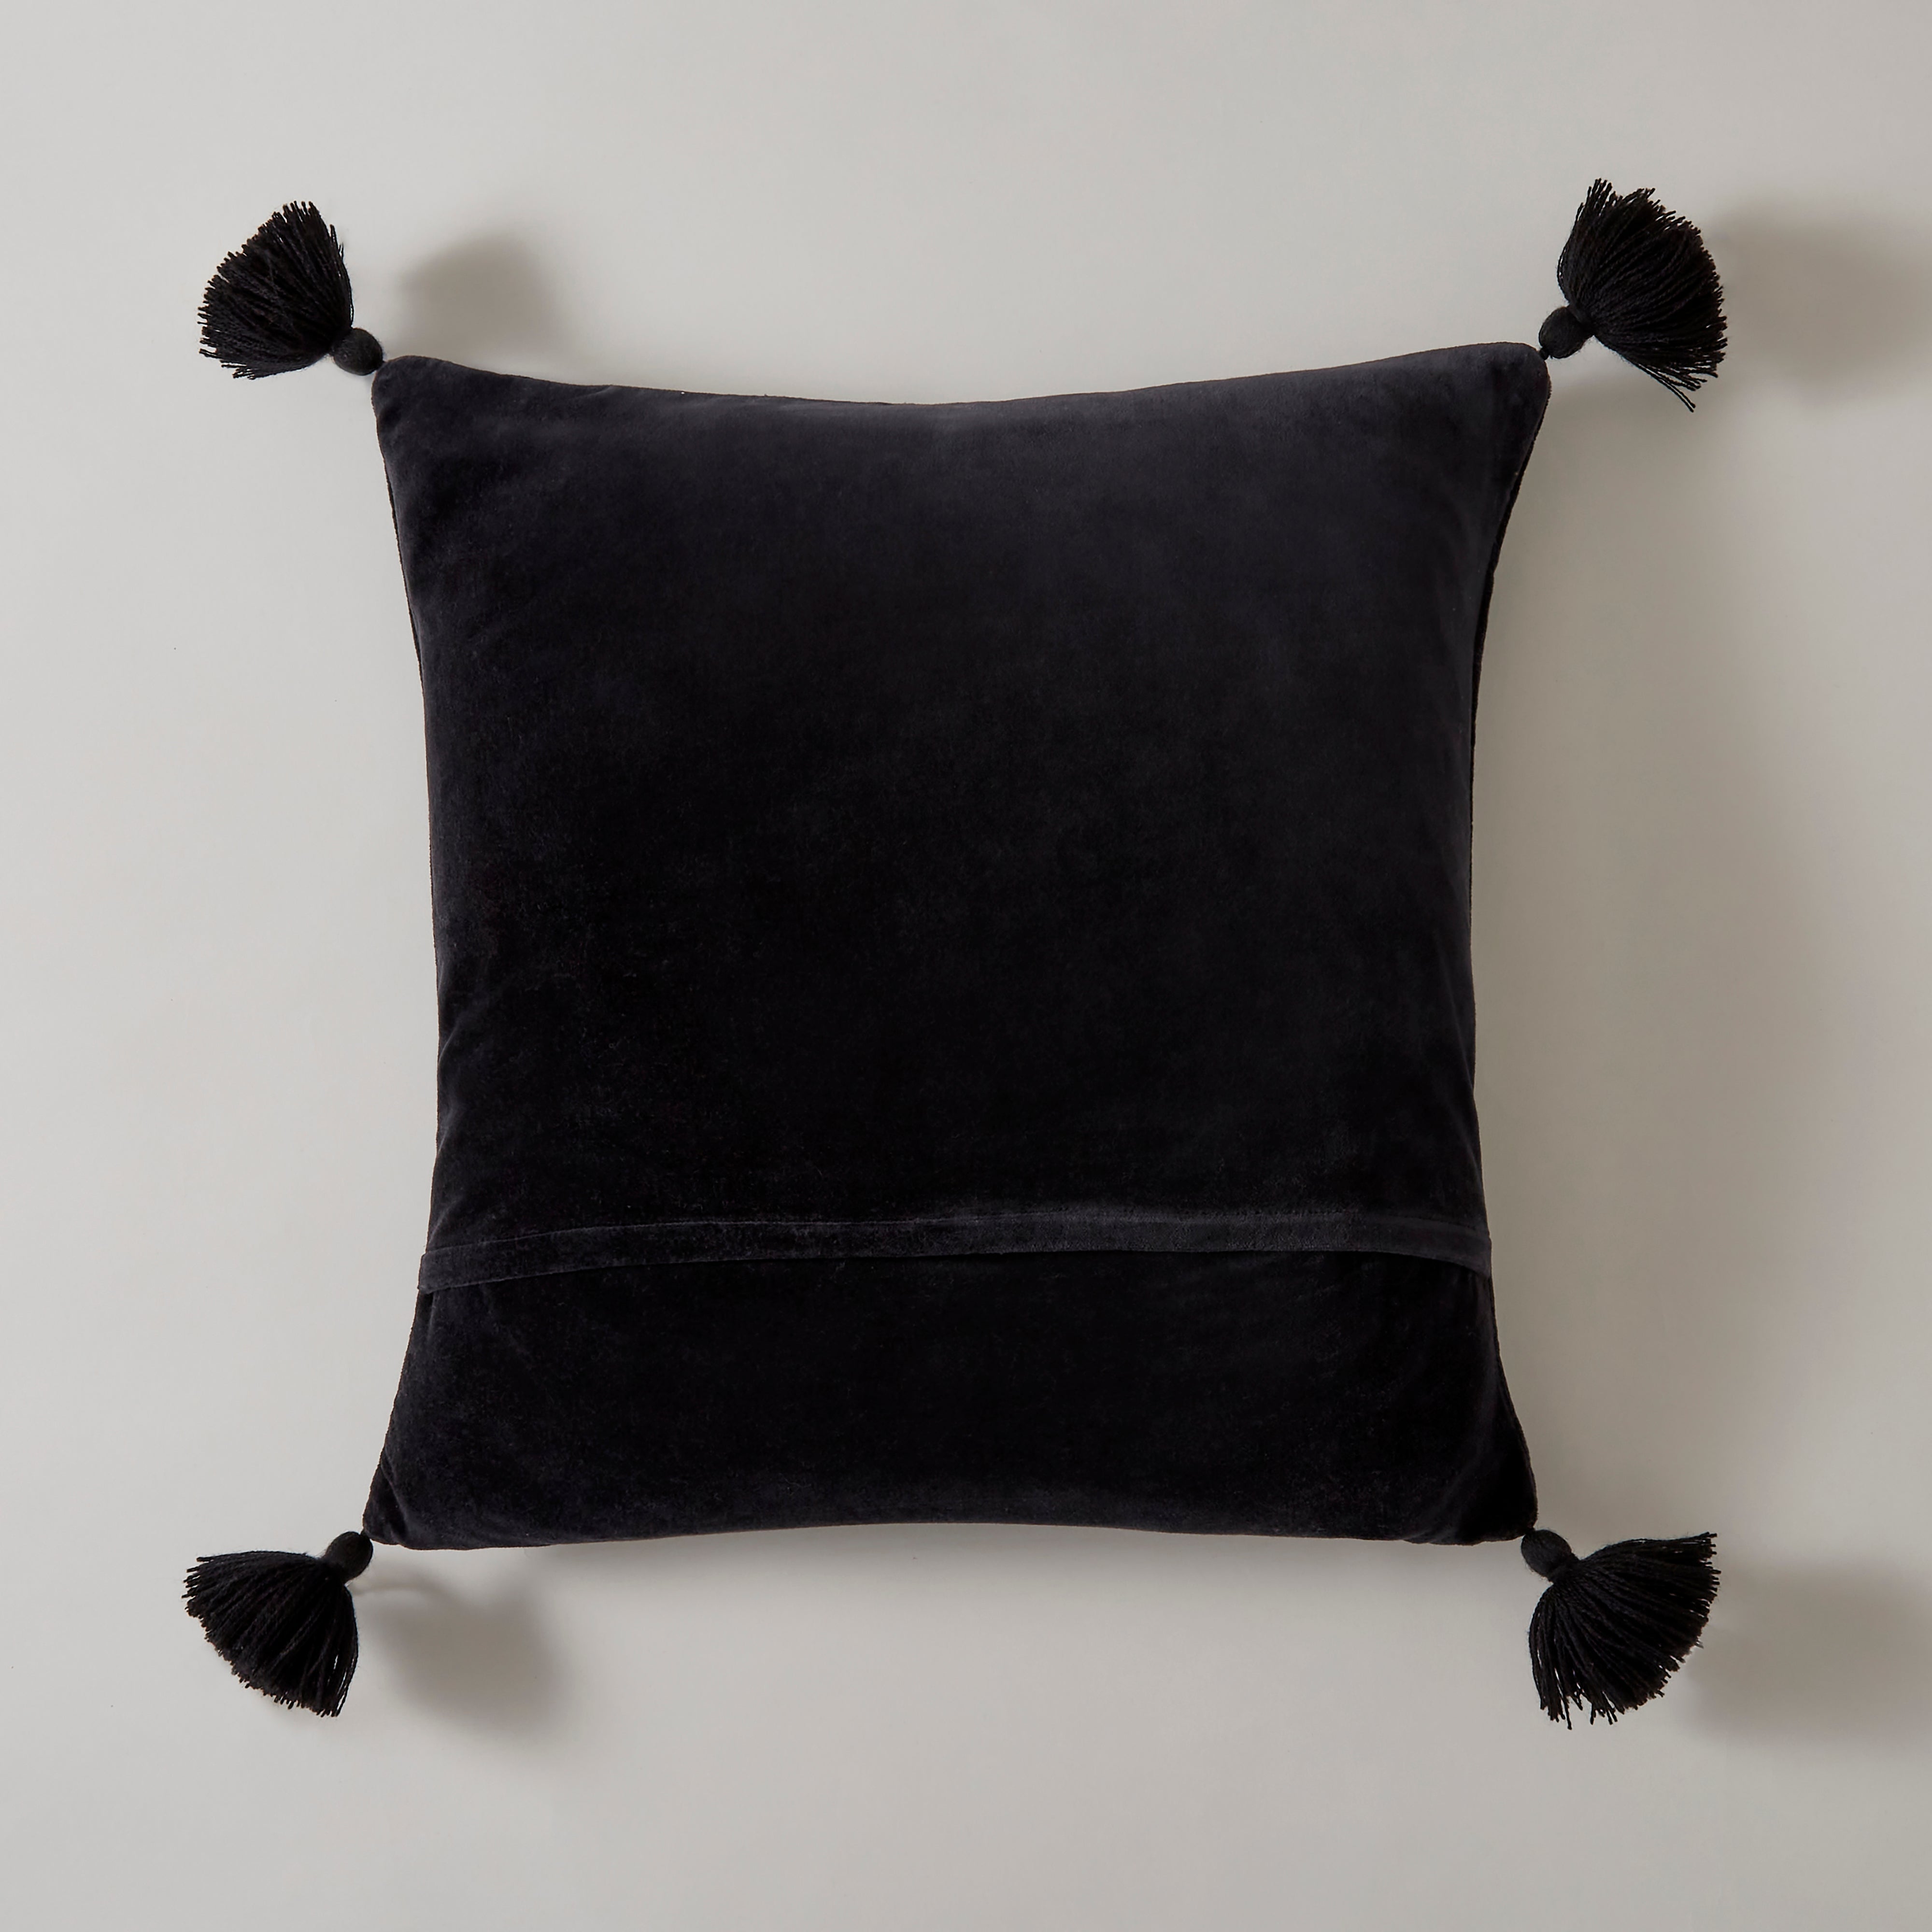 Dodo Embroidered Black Cushion Cover | Dunelm